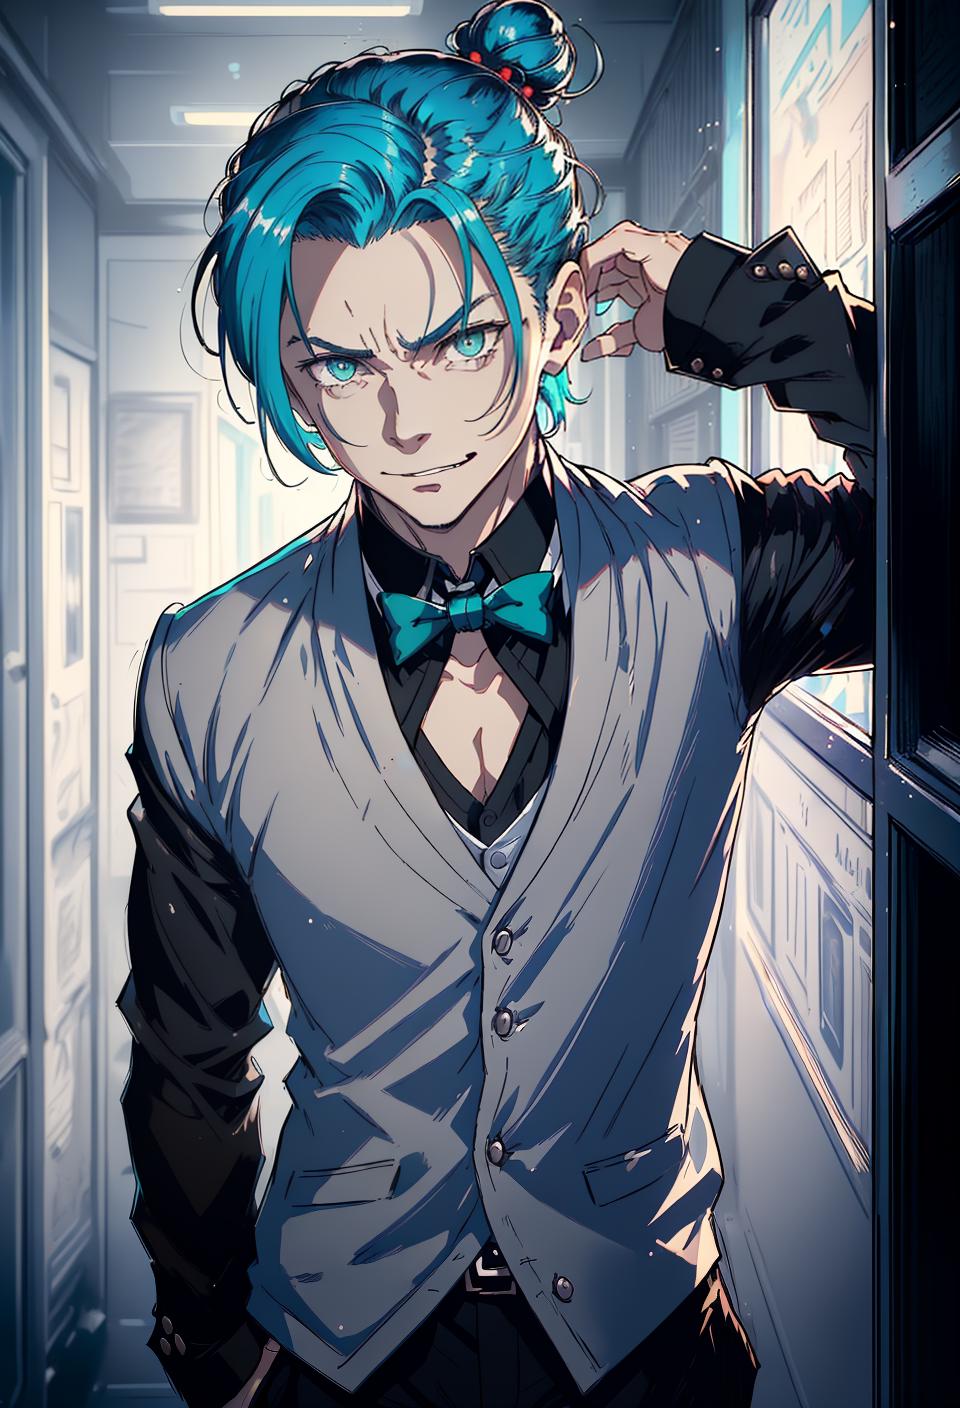  ((trending, highres, masterpiece, cinematic shot)), 1boy, mature, male date attire, ruins scene, very short straight aqua hair, hair in a bun, narrow grey eyes, evil personality, happy expression, grey skin, epic, limber